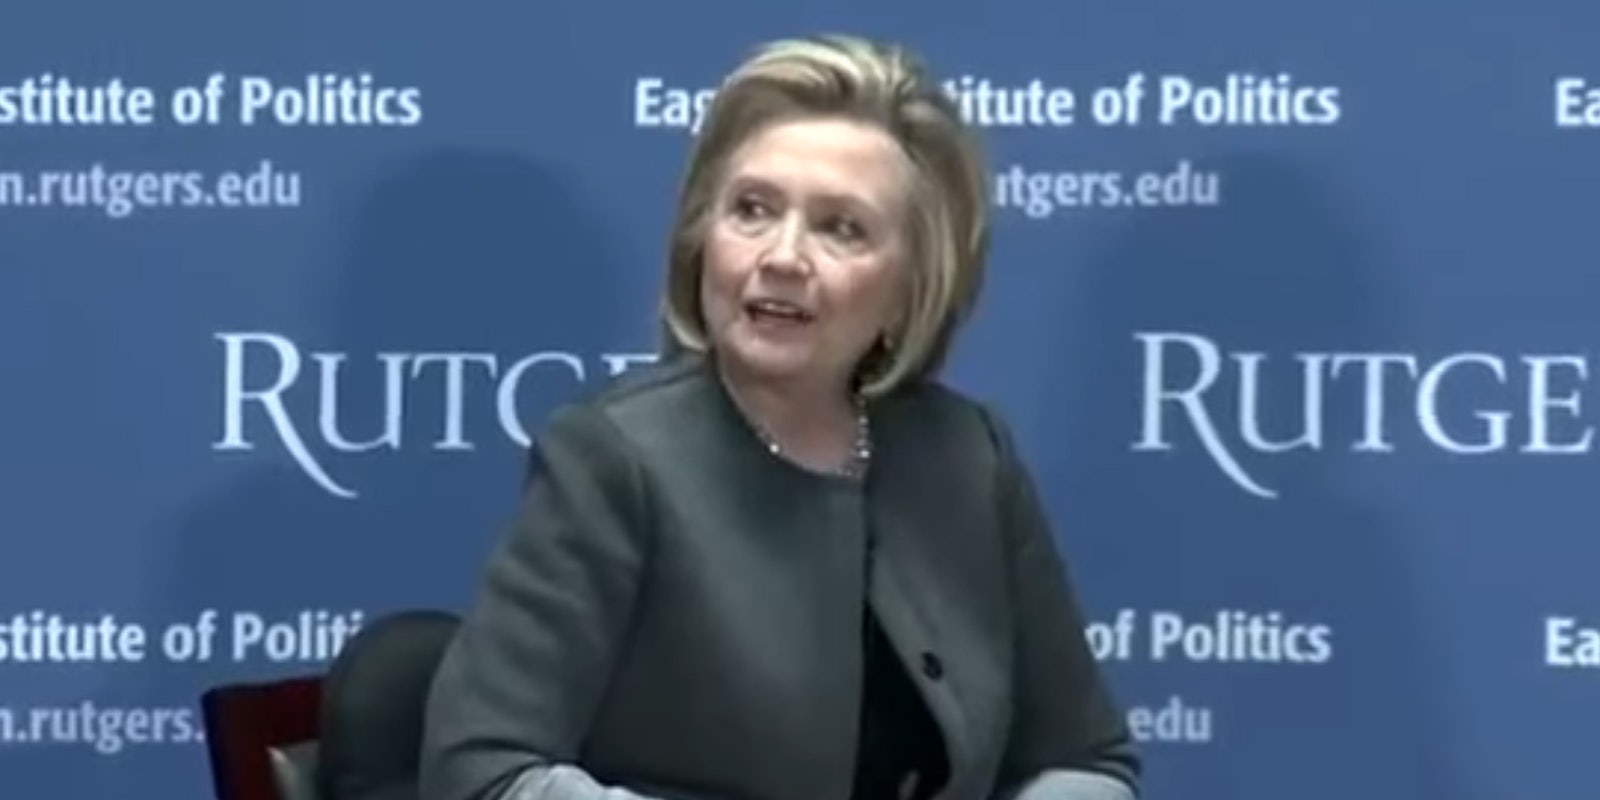 Hillary Clinton said men who lost presidential bids in the past were not told, like she has, to leave the public spotlight following their loss during a discussion at Rutgers University.